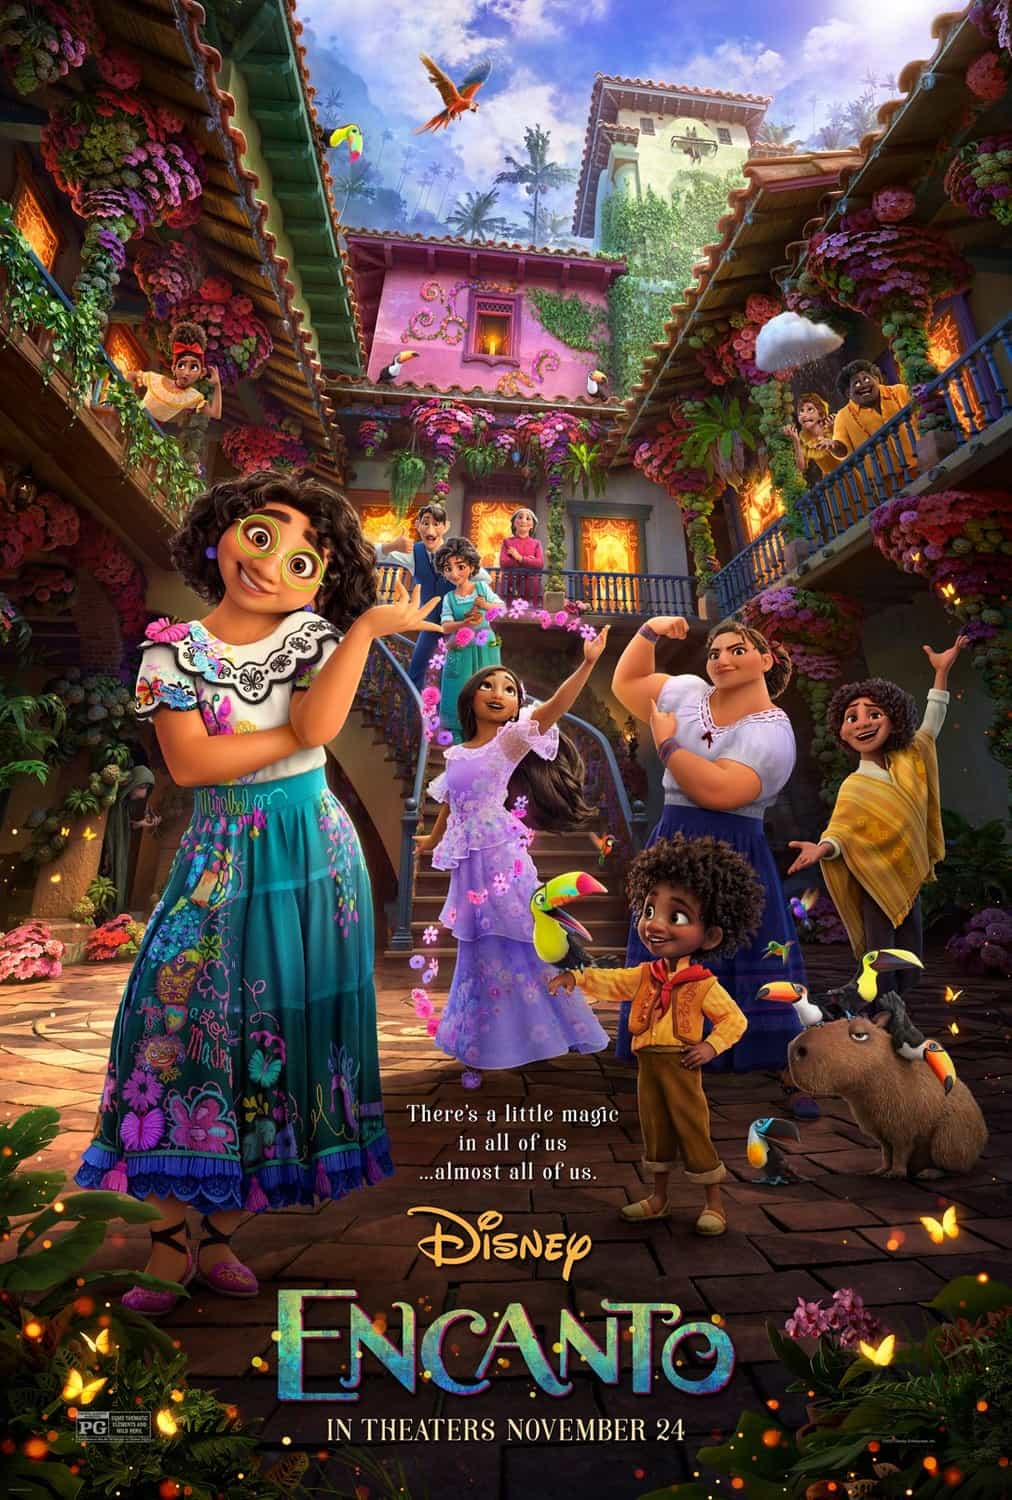 US Box Office Figures 26th - 28th November 2021:  Disney animated movie Encanto tops the US box office on its debut weekend with House of Gucci new at 3